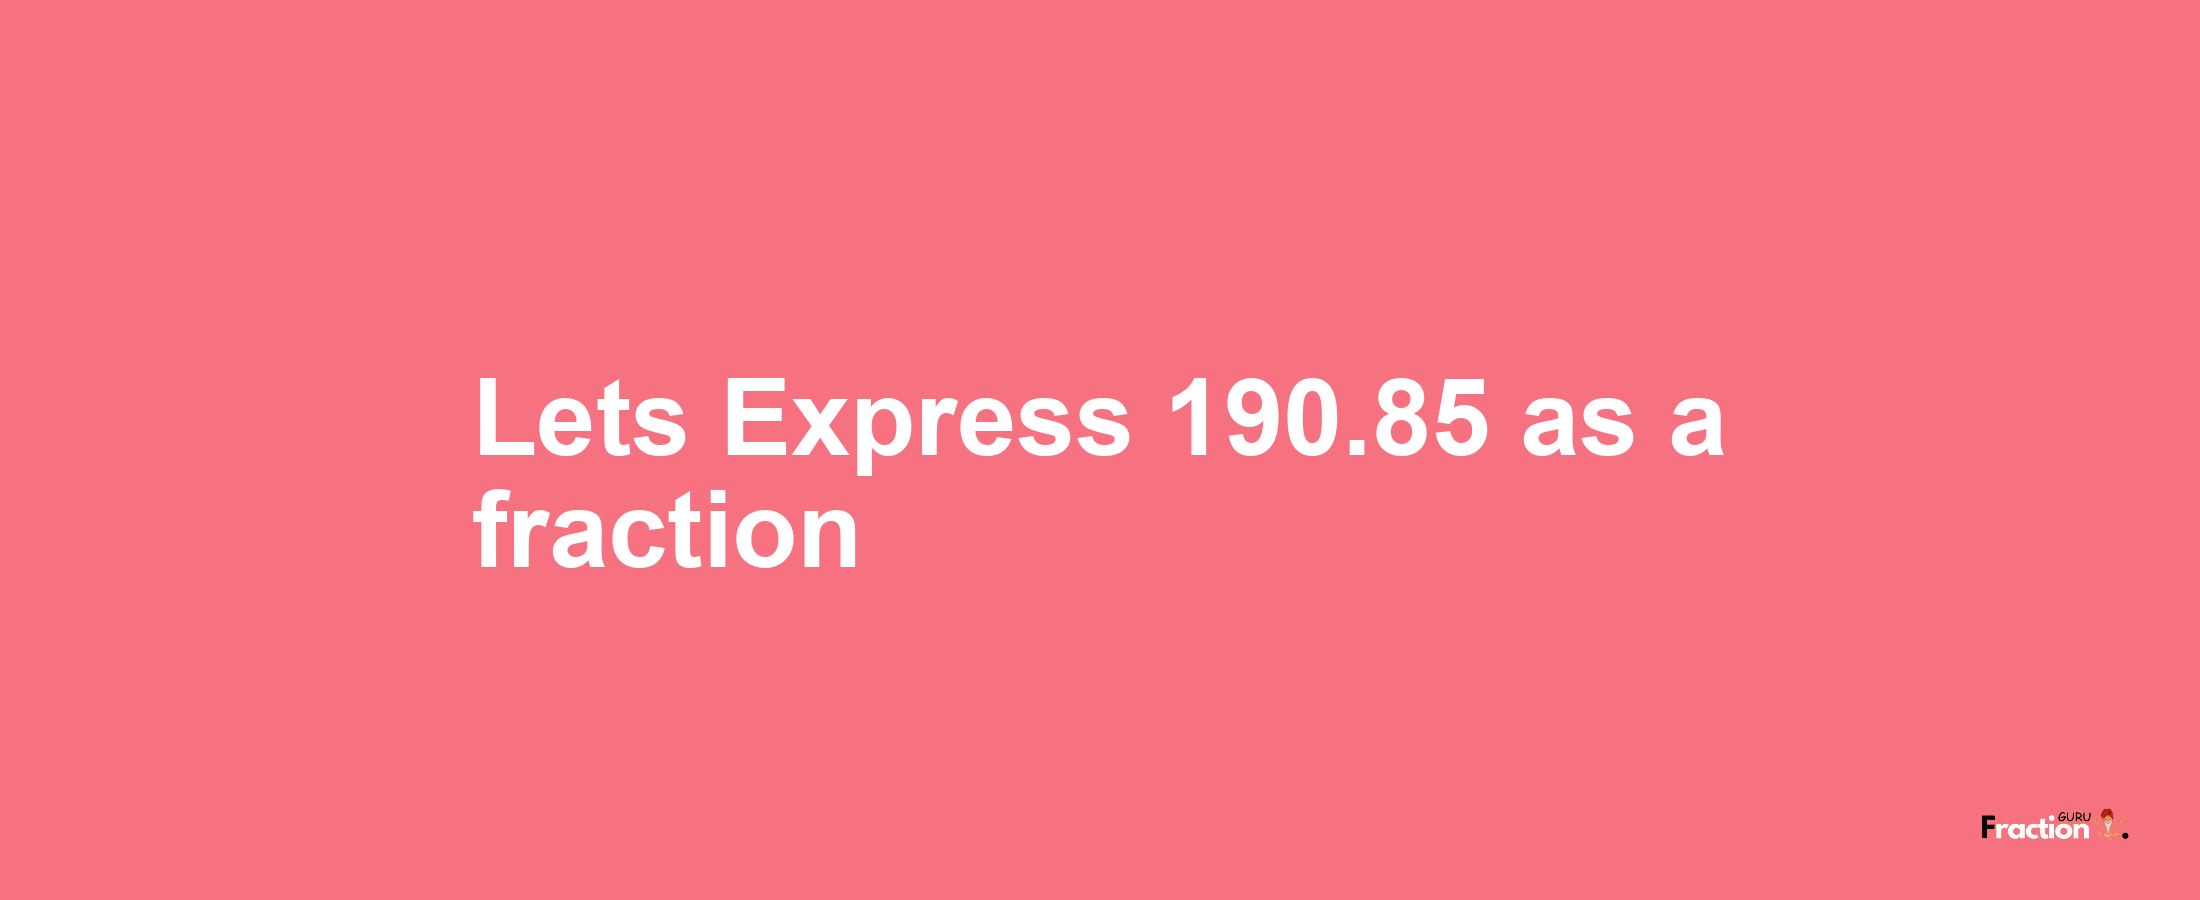 Lets Express 190.85 as afraction